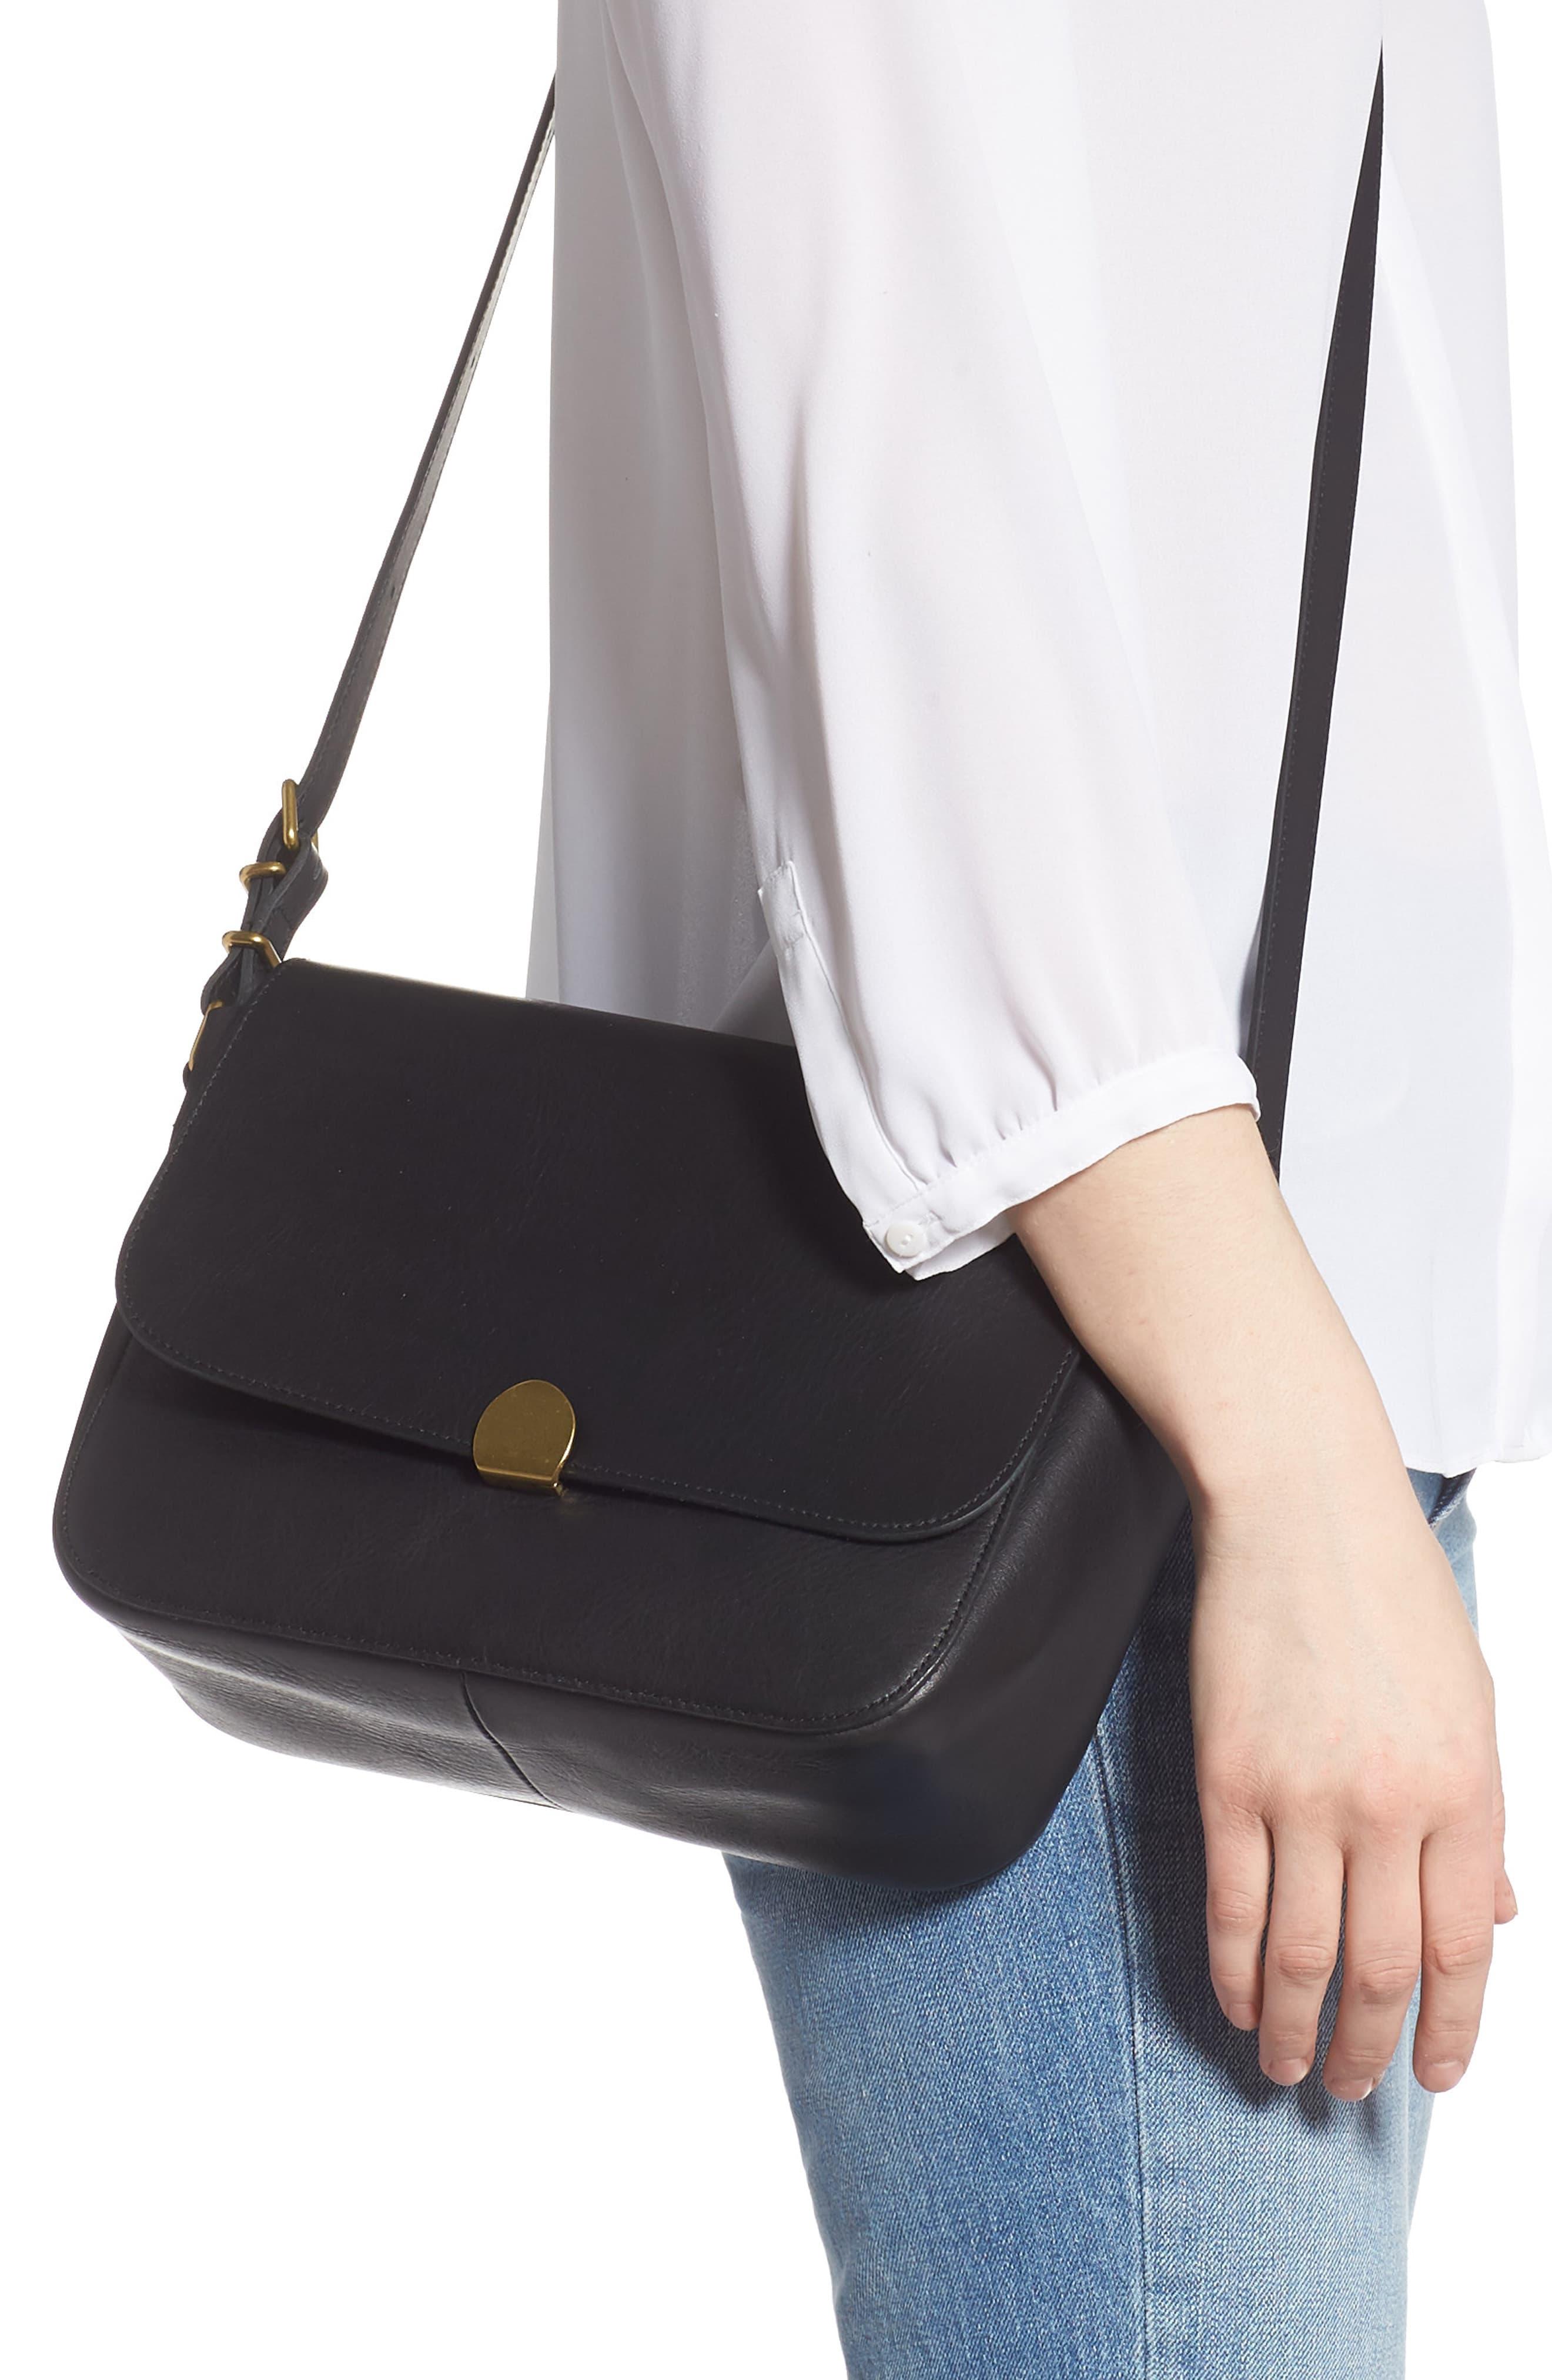 Madewell The Abroad Leather Shoulder Bag in Black - Lyst